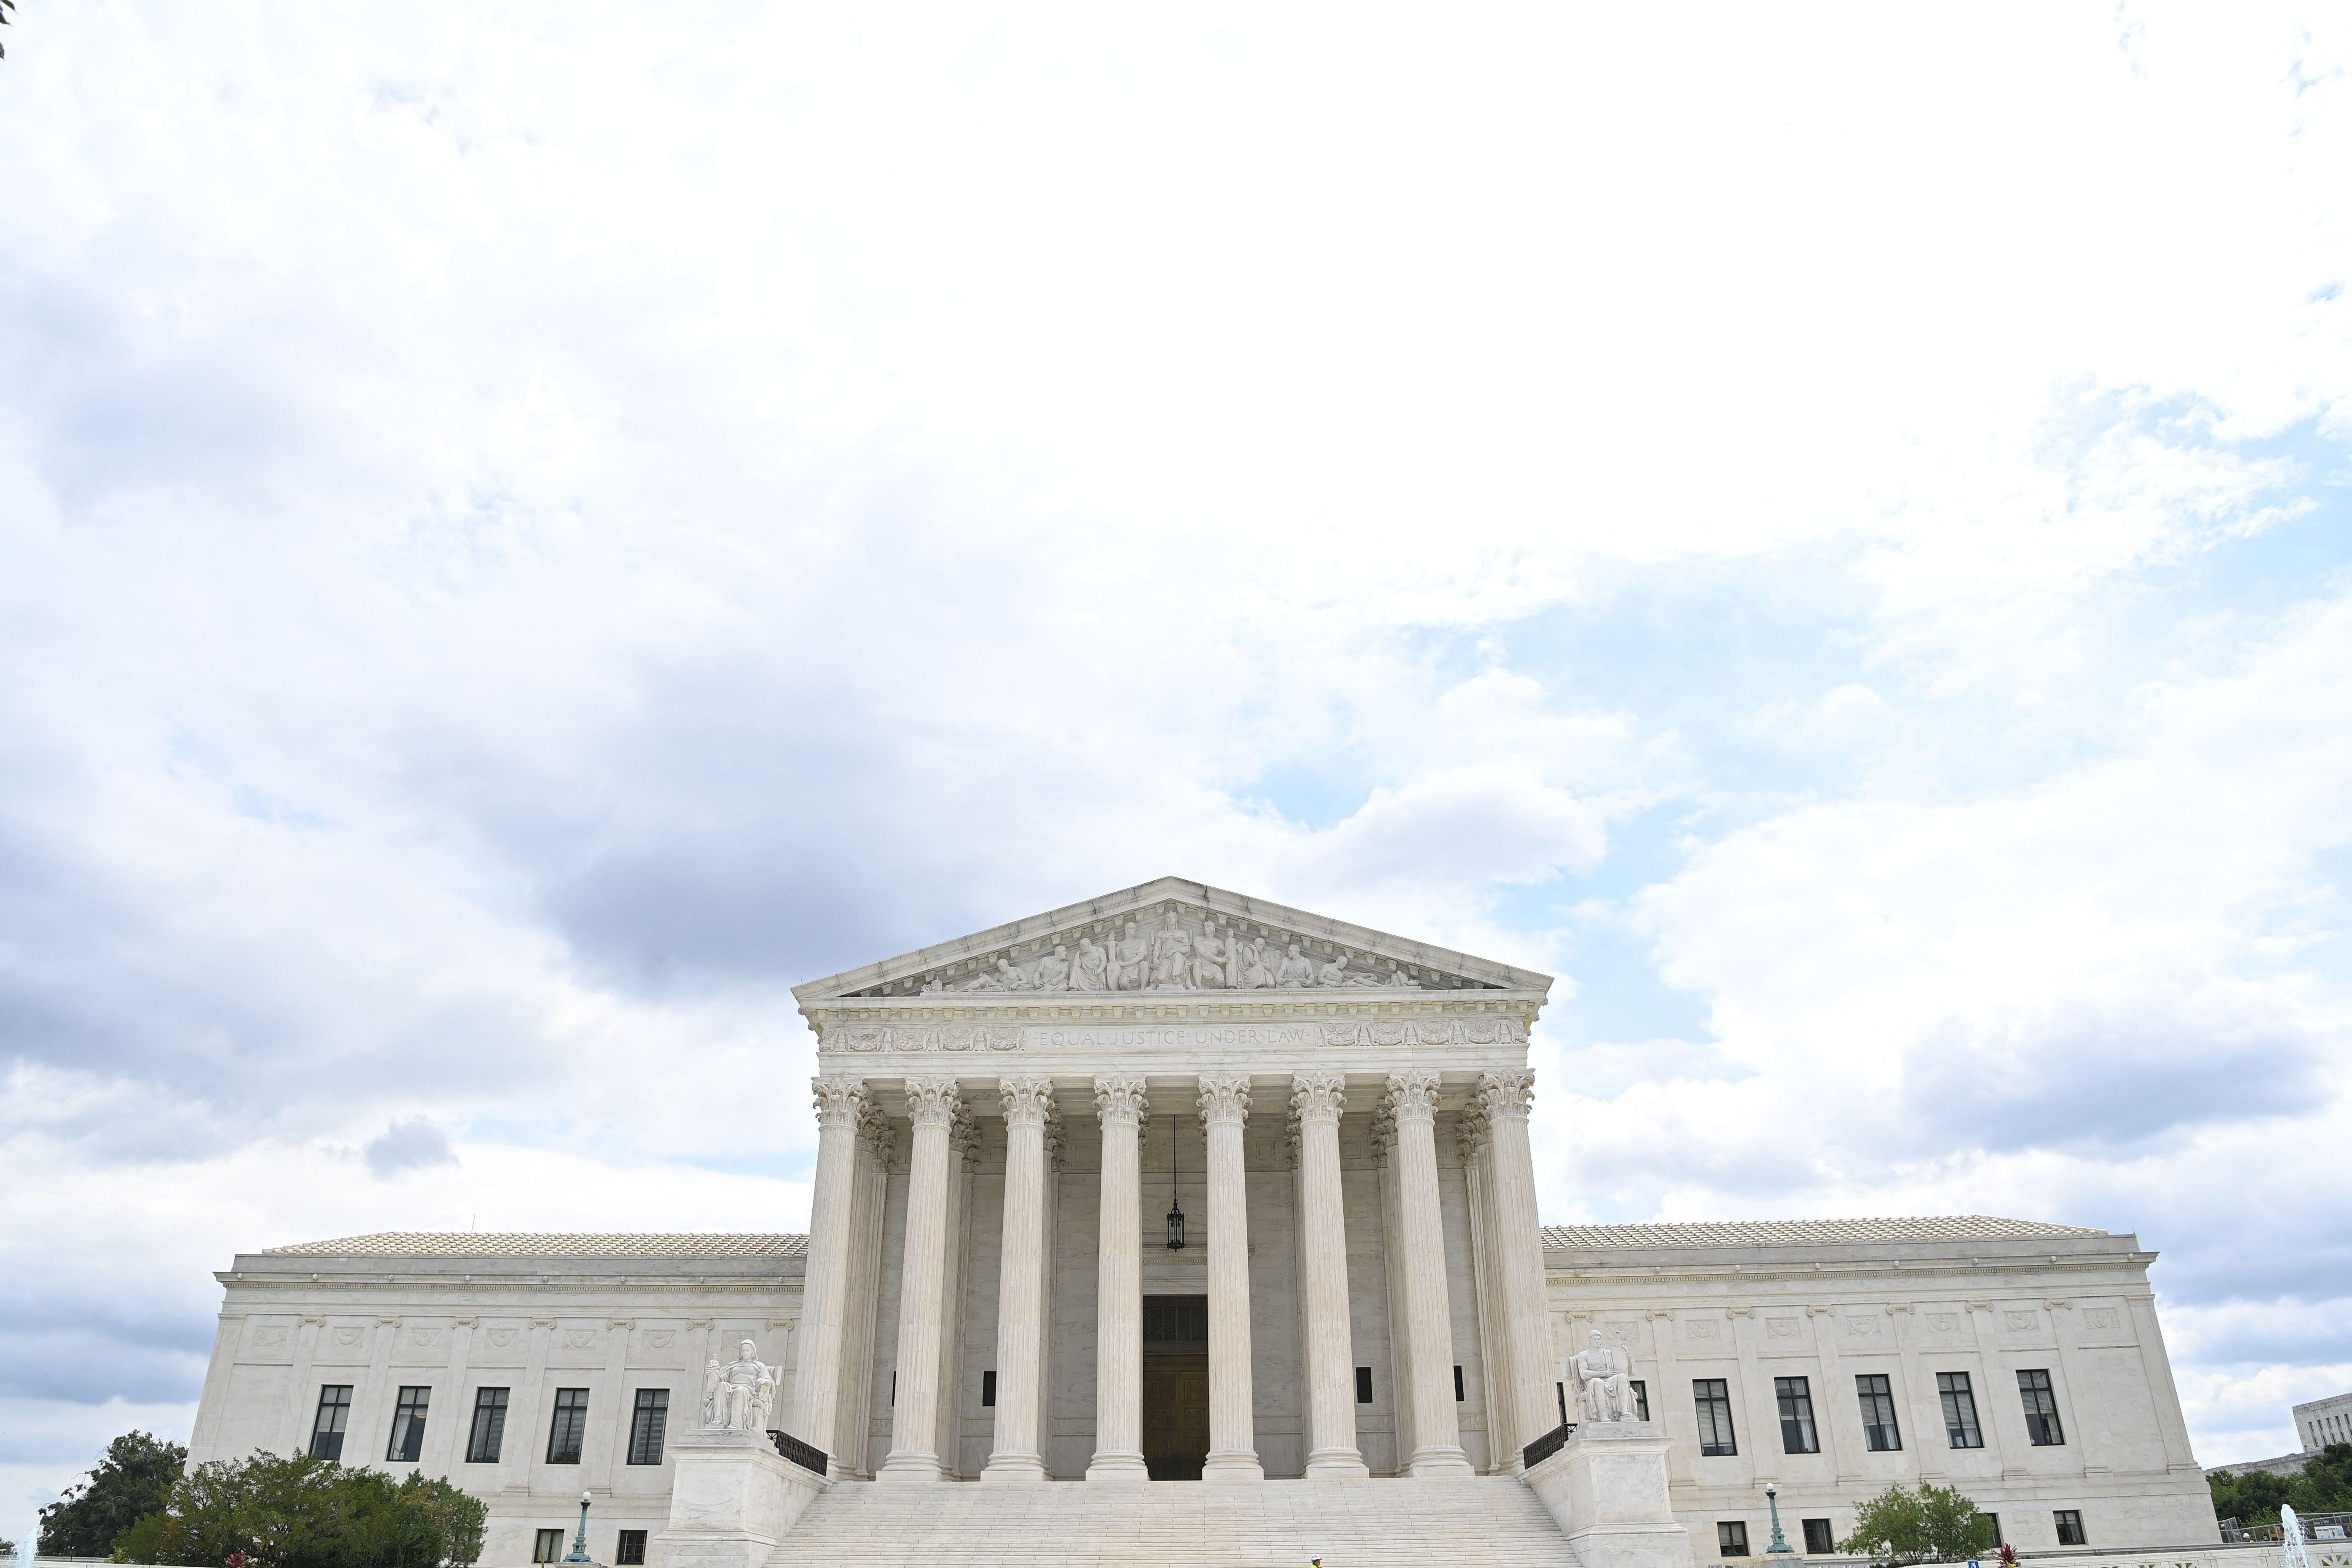 The Supreme Court building and a partly cloudy sky.